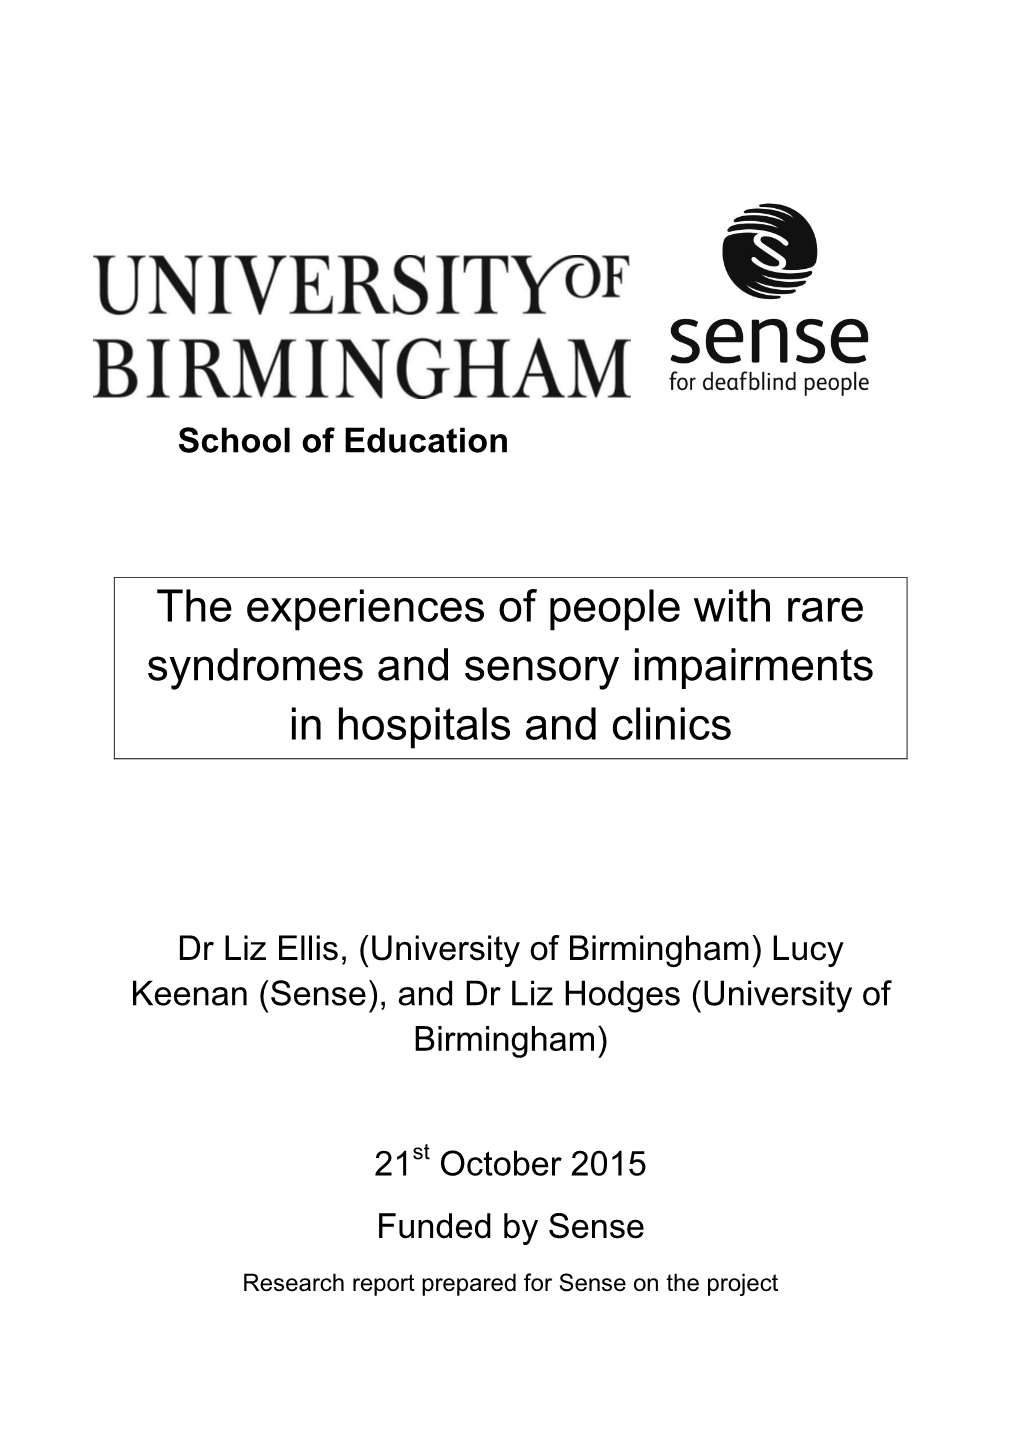 The Experiences of People with Rare Syndromes and Sensory Impairments in Hospitals and Clinics